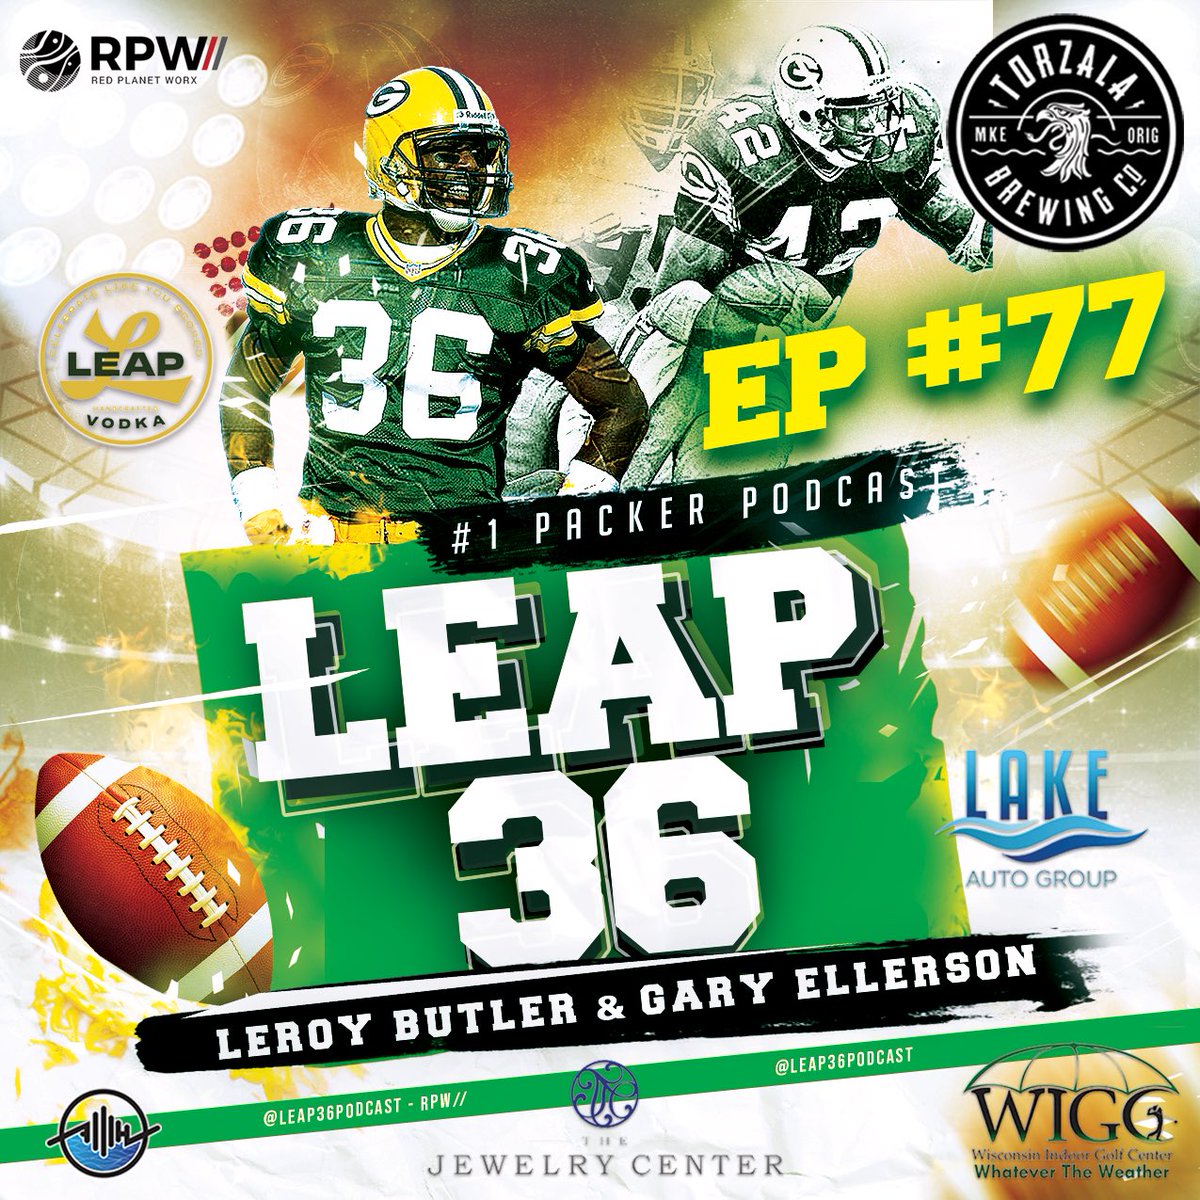 🚨NEW Episode #77! Listen to full episode available wherever you get your favorite podcast. Please subscribe, download, like share, follow all that good stuff! @Leap36Podcast with @ProFootballHOF @packers @leap36 & @GaryEllerson ! 🏈🎙️🧀 Spotify rb.gy/qvvti0